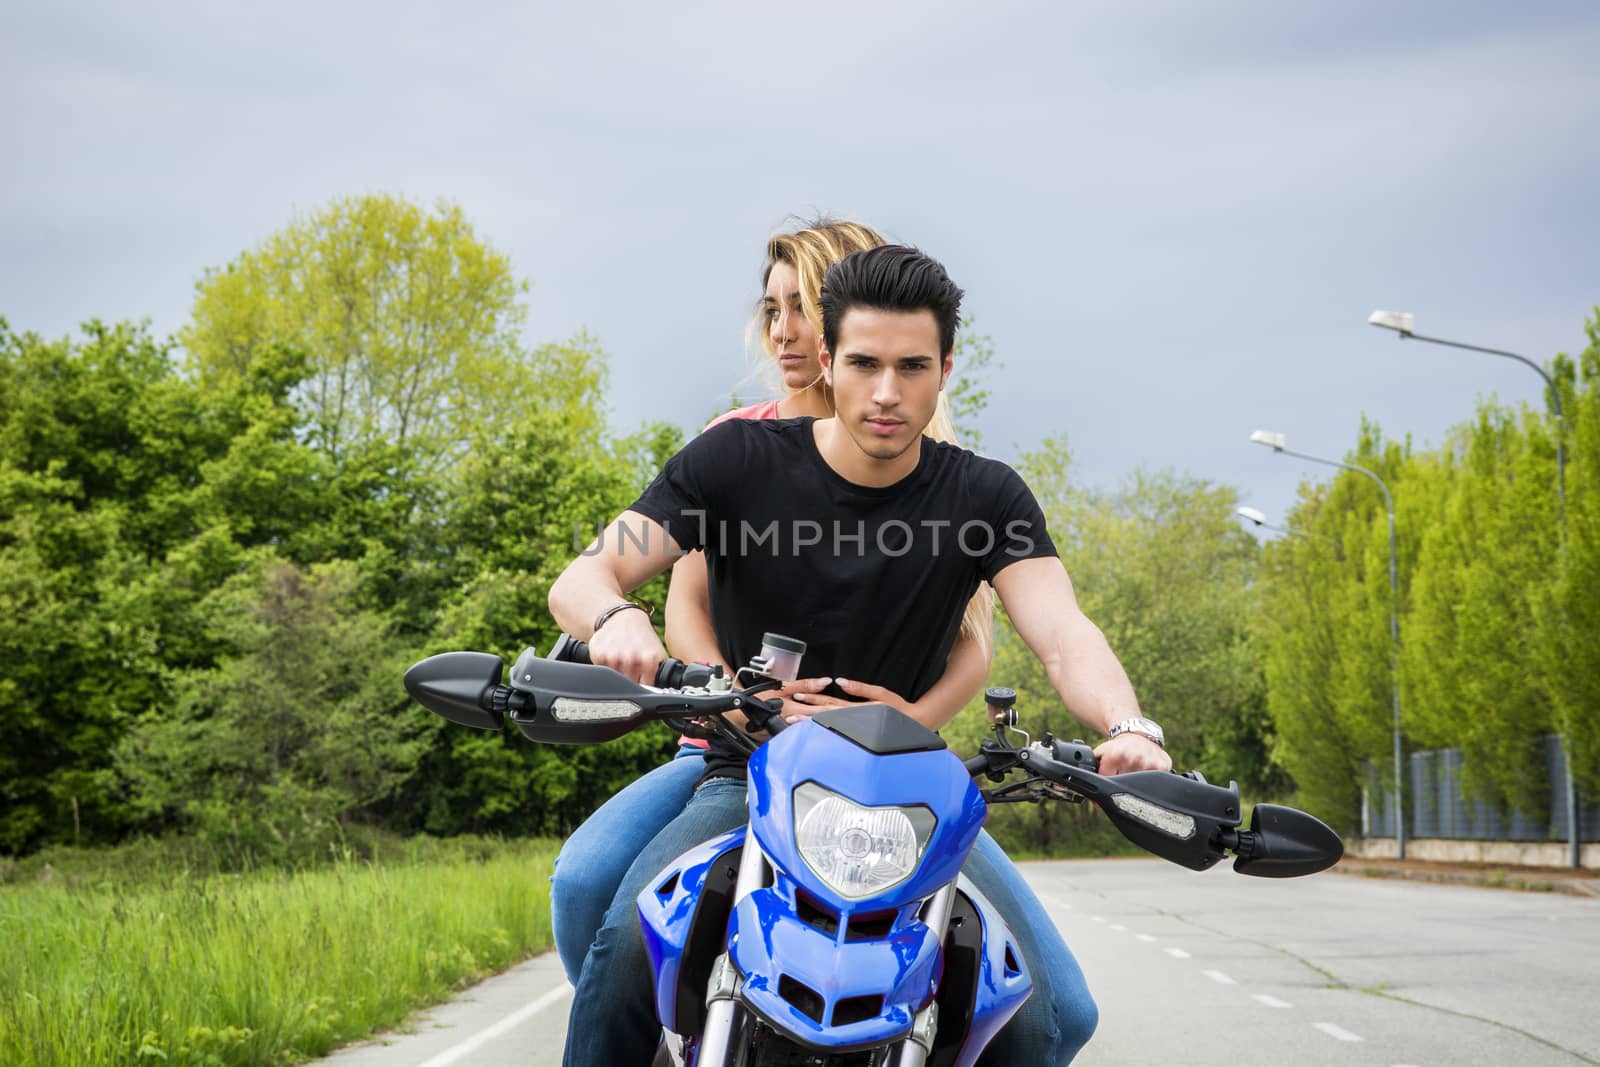 Man and woman riding motorcycle by artofphoto